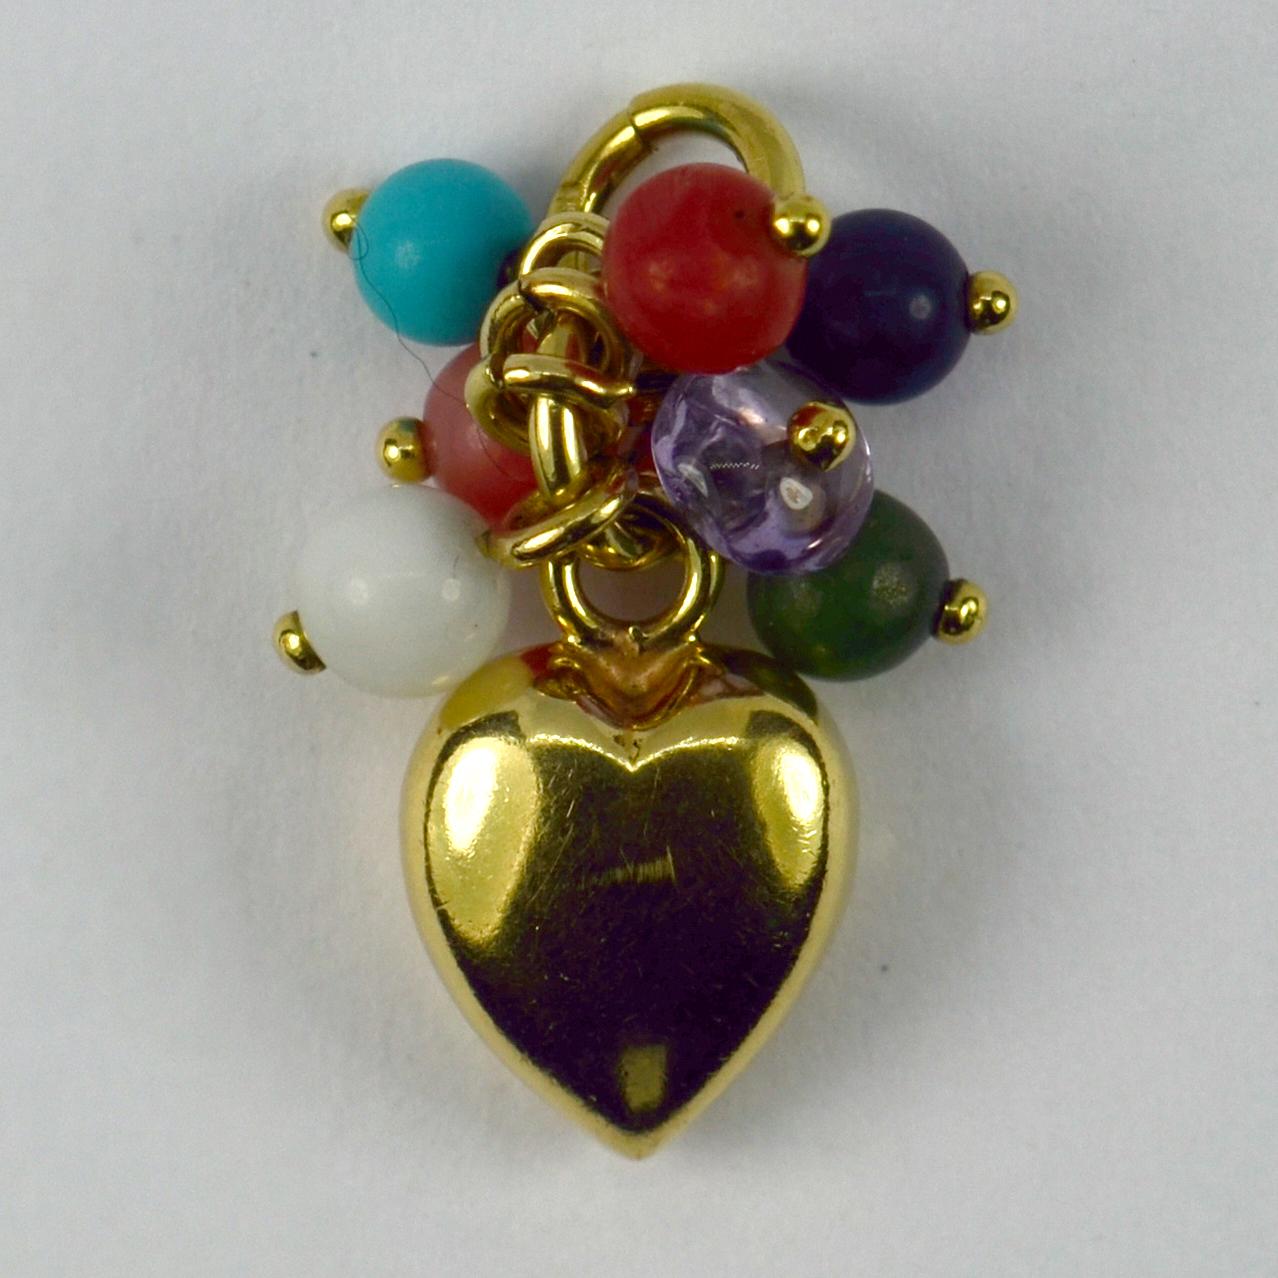 An 18 karat (18K) yellow gold and gem set charm pendant designed as a puffy heart with a gem tassel including amethyst, coral, sodalite, turquoise, nephrite and cochlong opal. Stamped with the owl punch mark for 18 karat gold and French